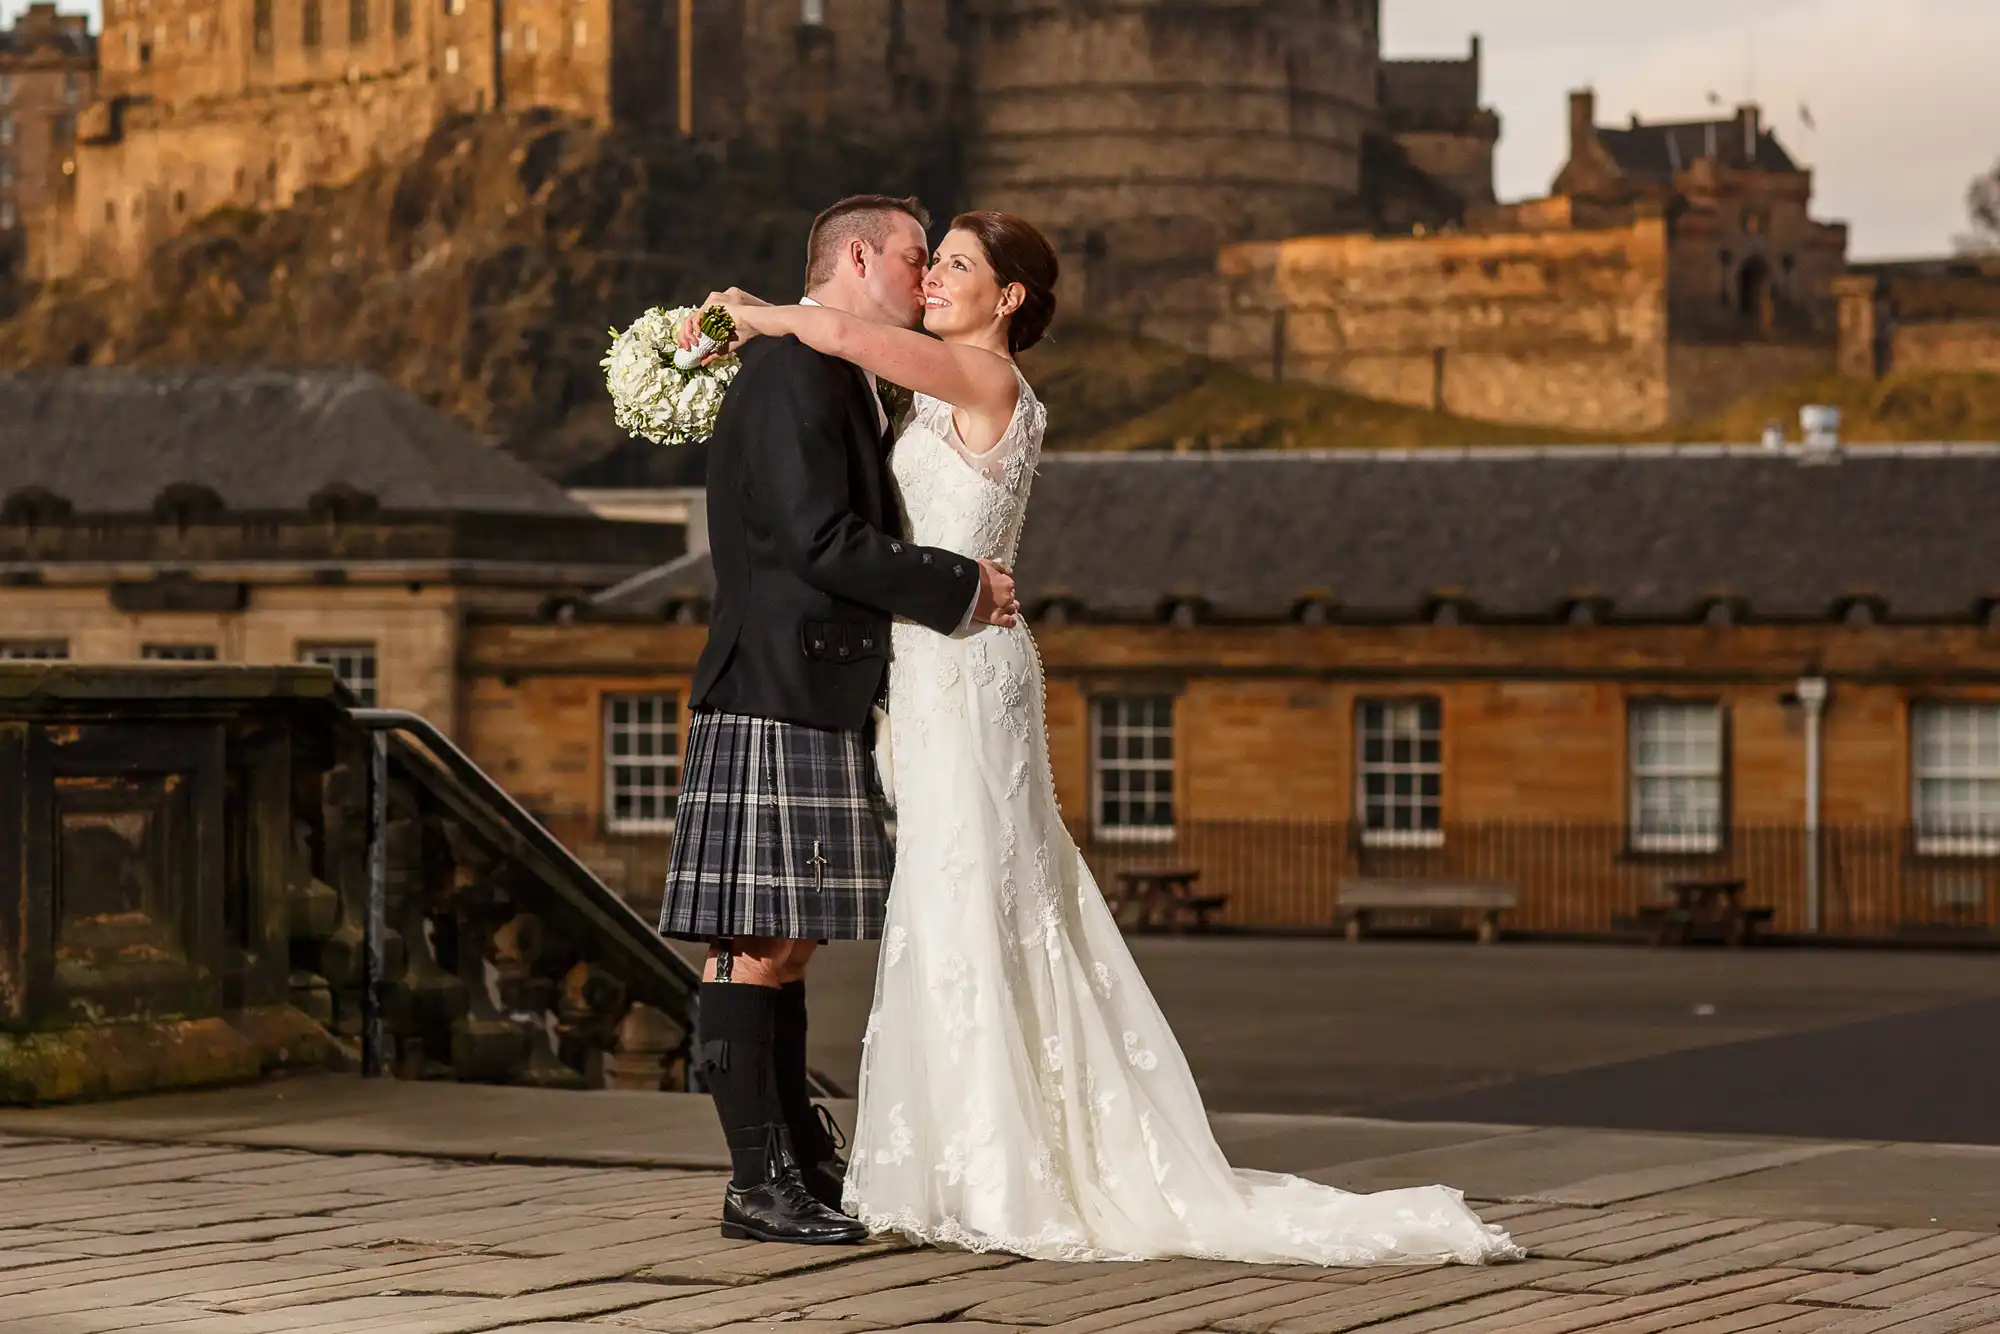 A bride and groom kissing, with the groom in a kilt and the bride in a white gown, in front of a castle on a sunny day.